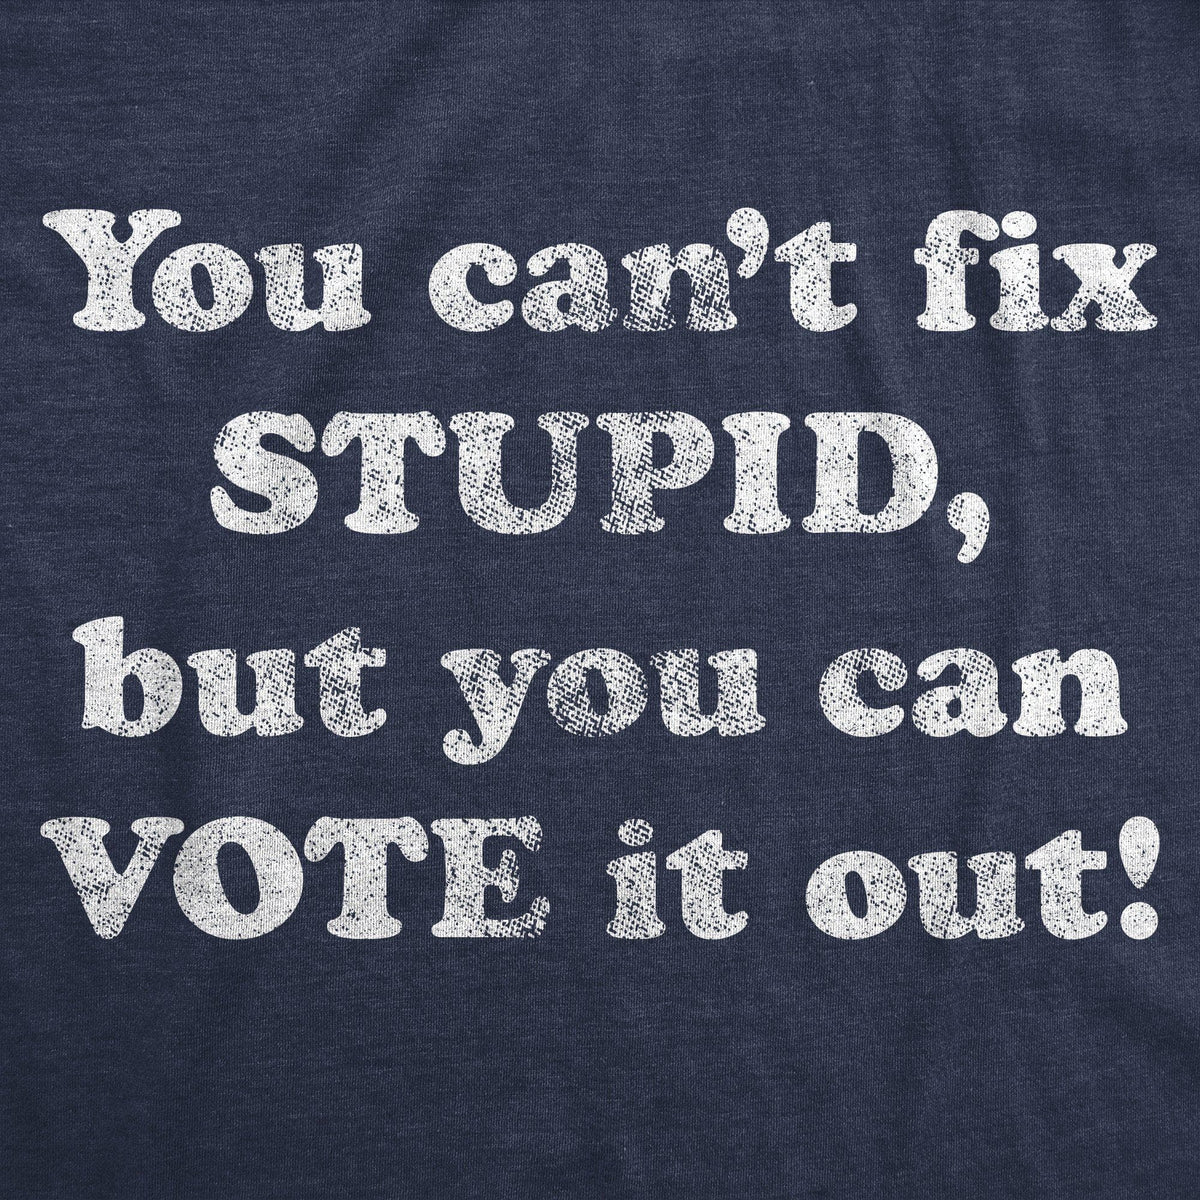 You Can&#39;t Fix Stupid But You Can Vote It Out Men&#39;s Tshirt - Crazy Dog T-Shirts